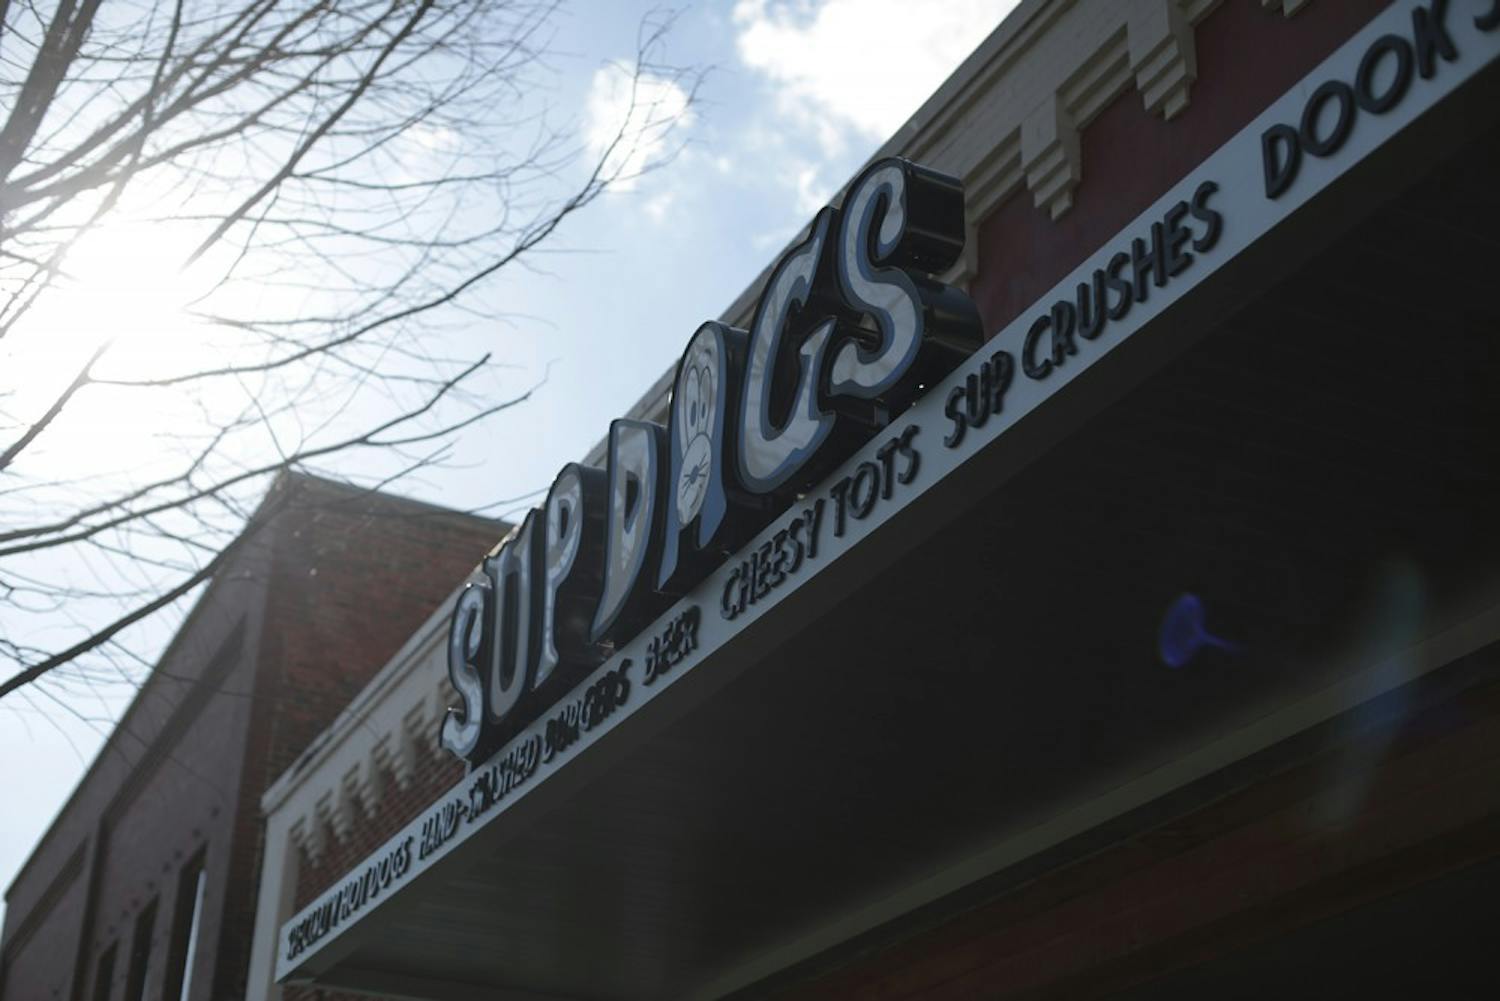 People traditionally gather at Sup Dogs&nbsp;to watch North Carolina men's basketball games.